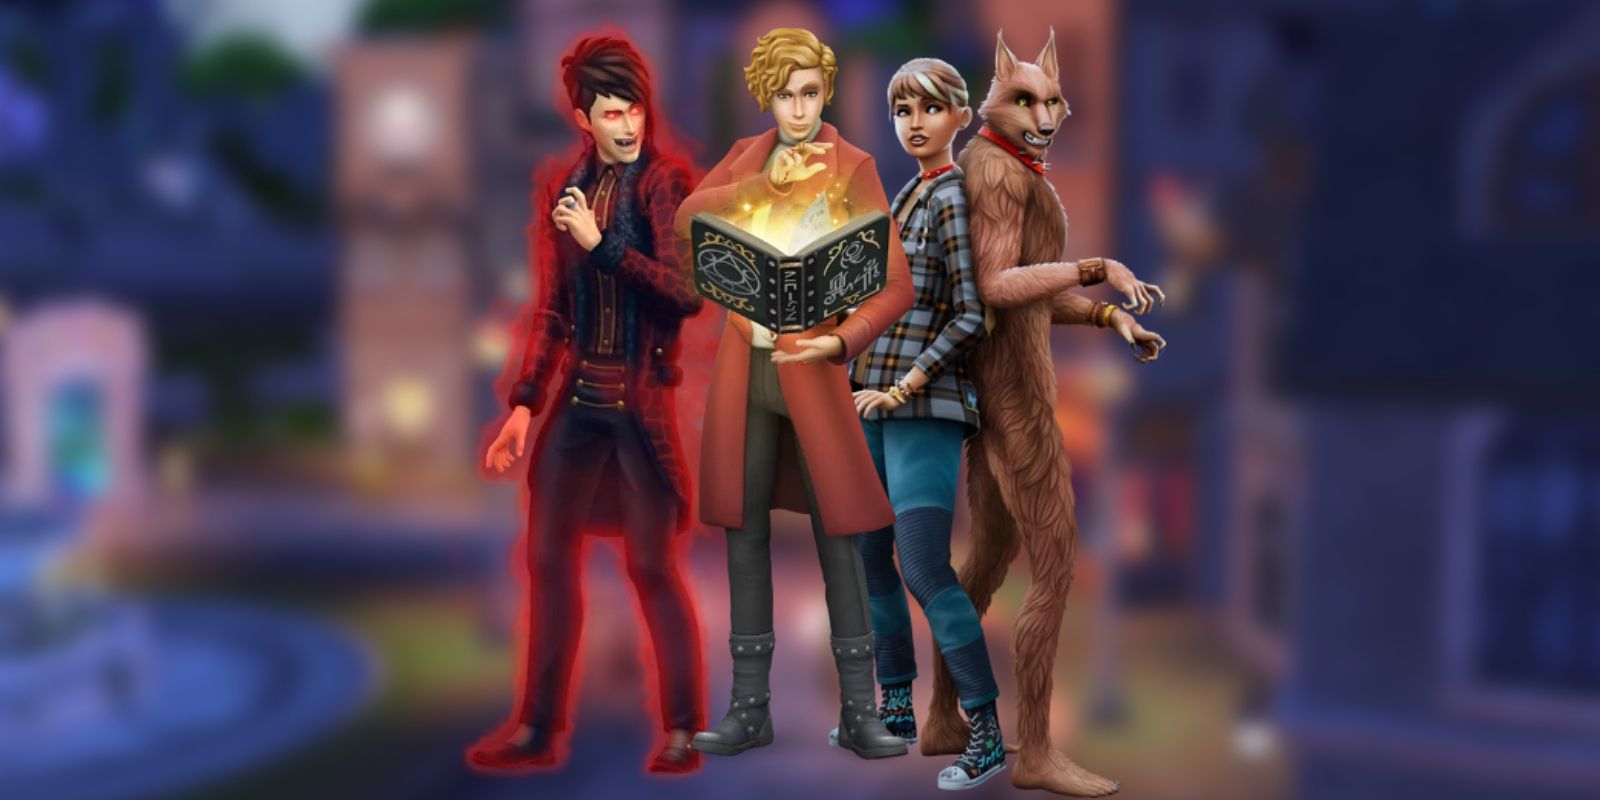 Sims 4 High School Years review - is the new pack worth buying?